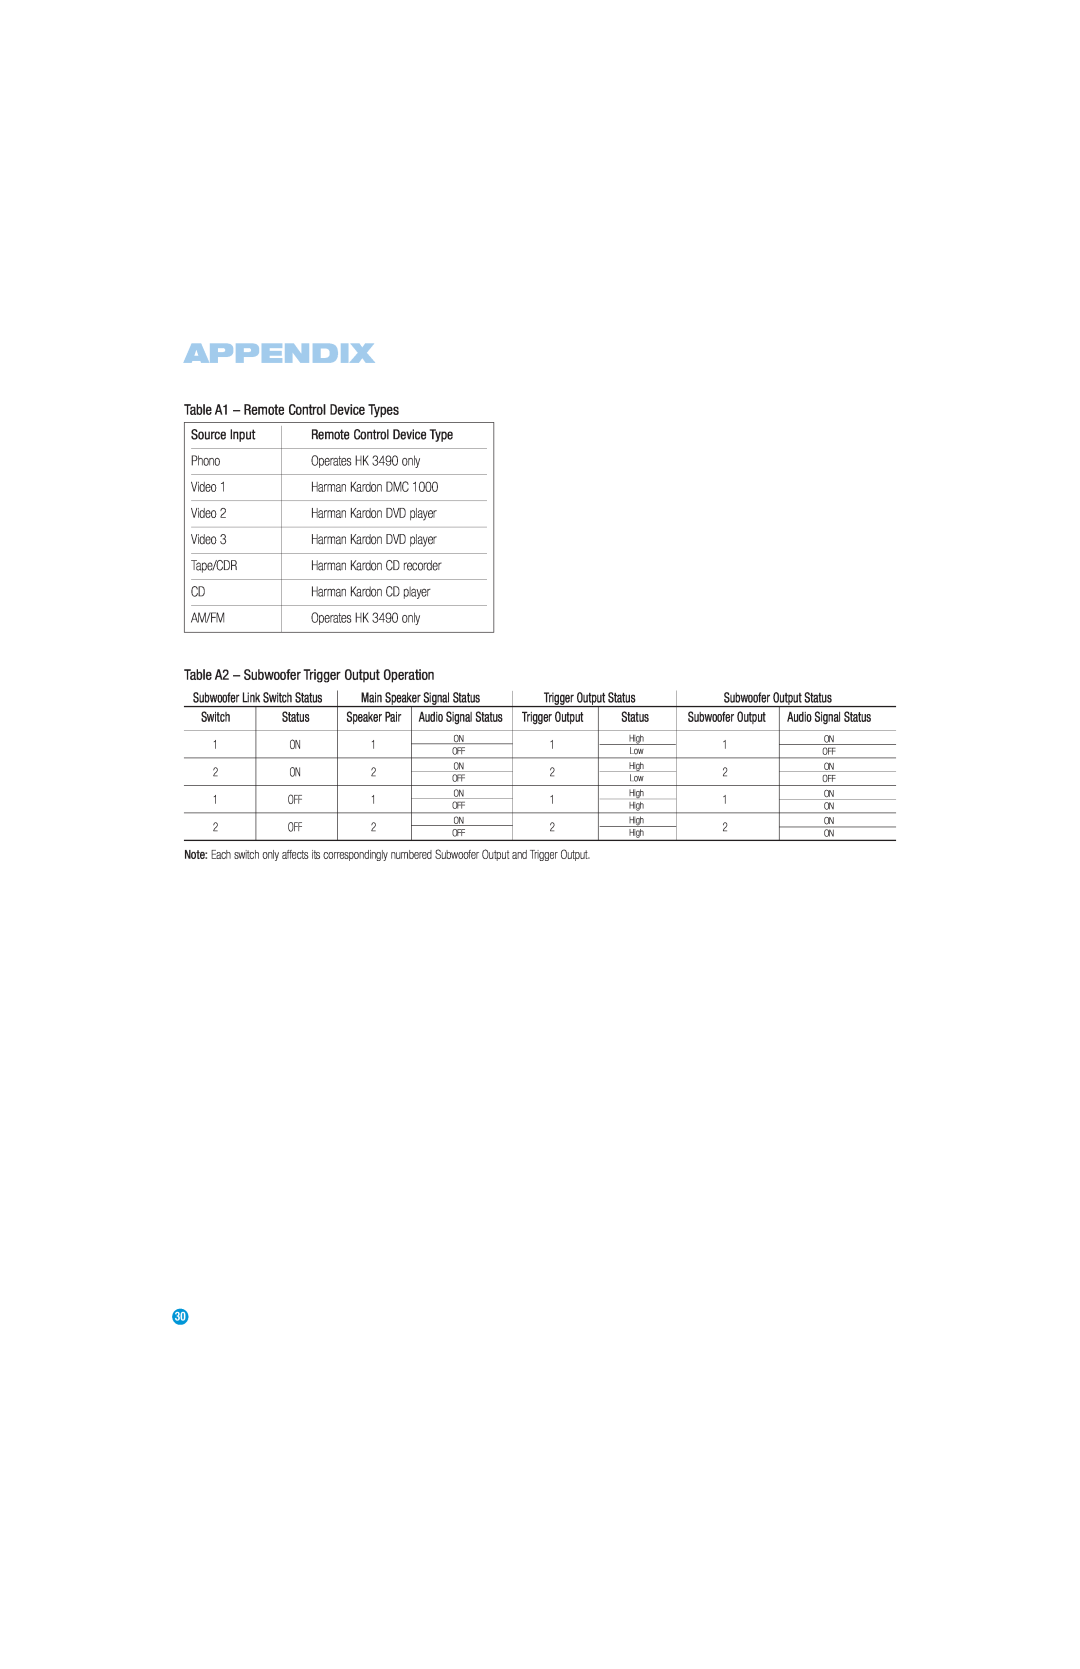 Harman-Kardon HK3490 Appendix, Table A1 - Remote Control Device Types, Table A2 - Subwoofer Trigger Output Operation 